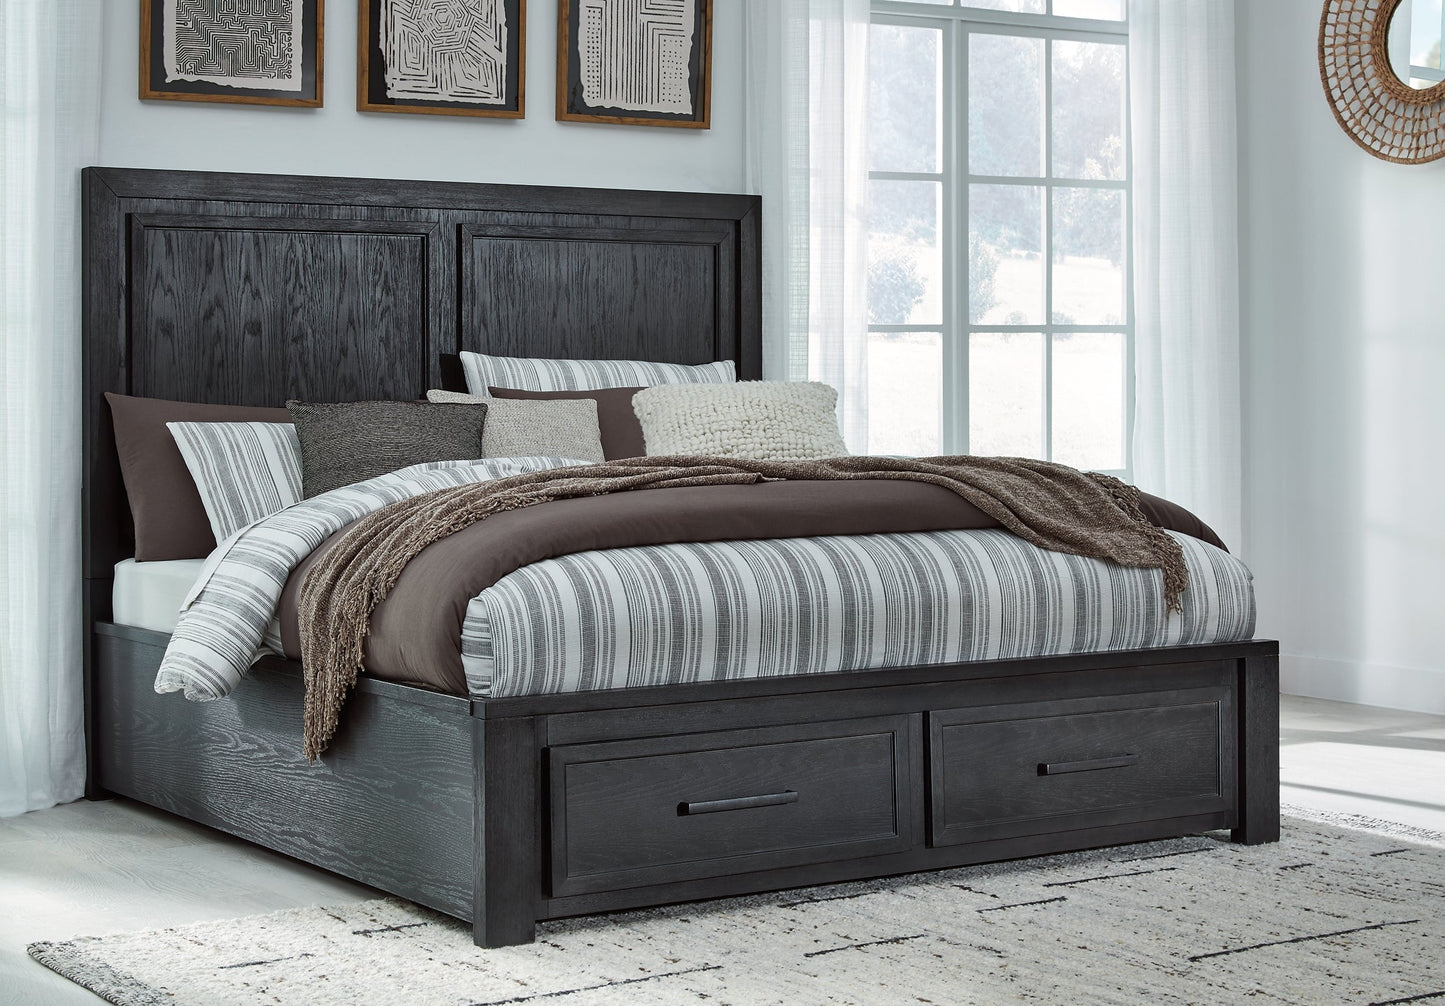 Foyland California King Panel Storage Bed with Dresser Rent Wise Rent To Own Jacksonville, Florida